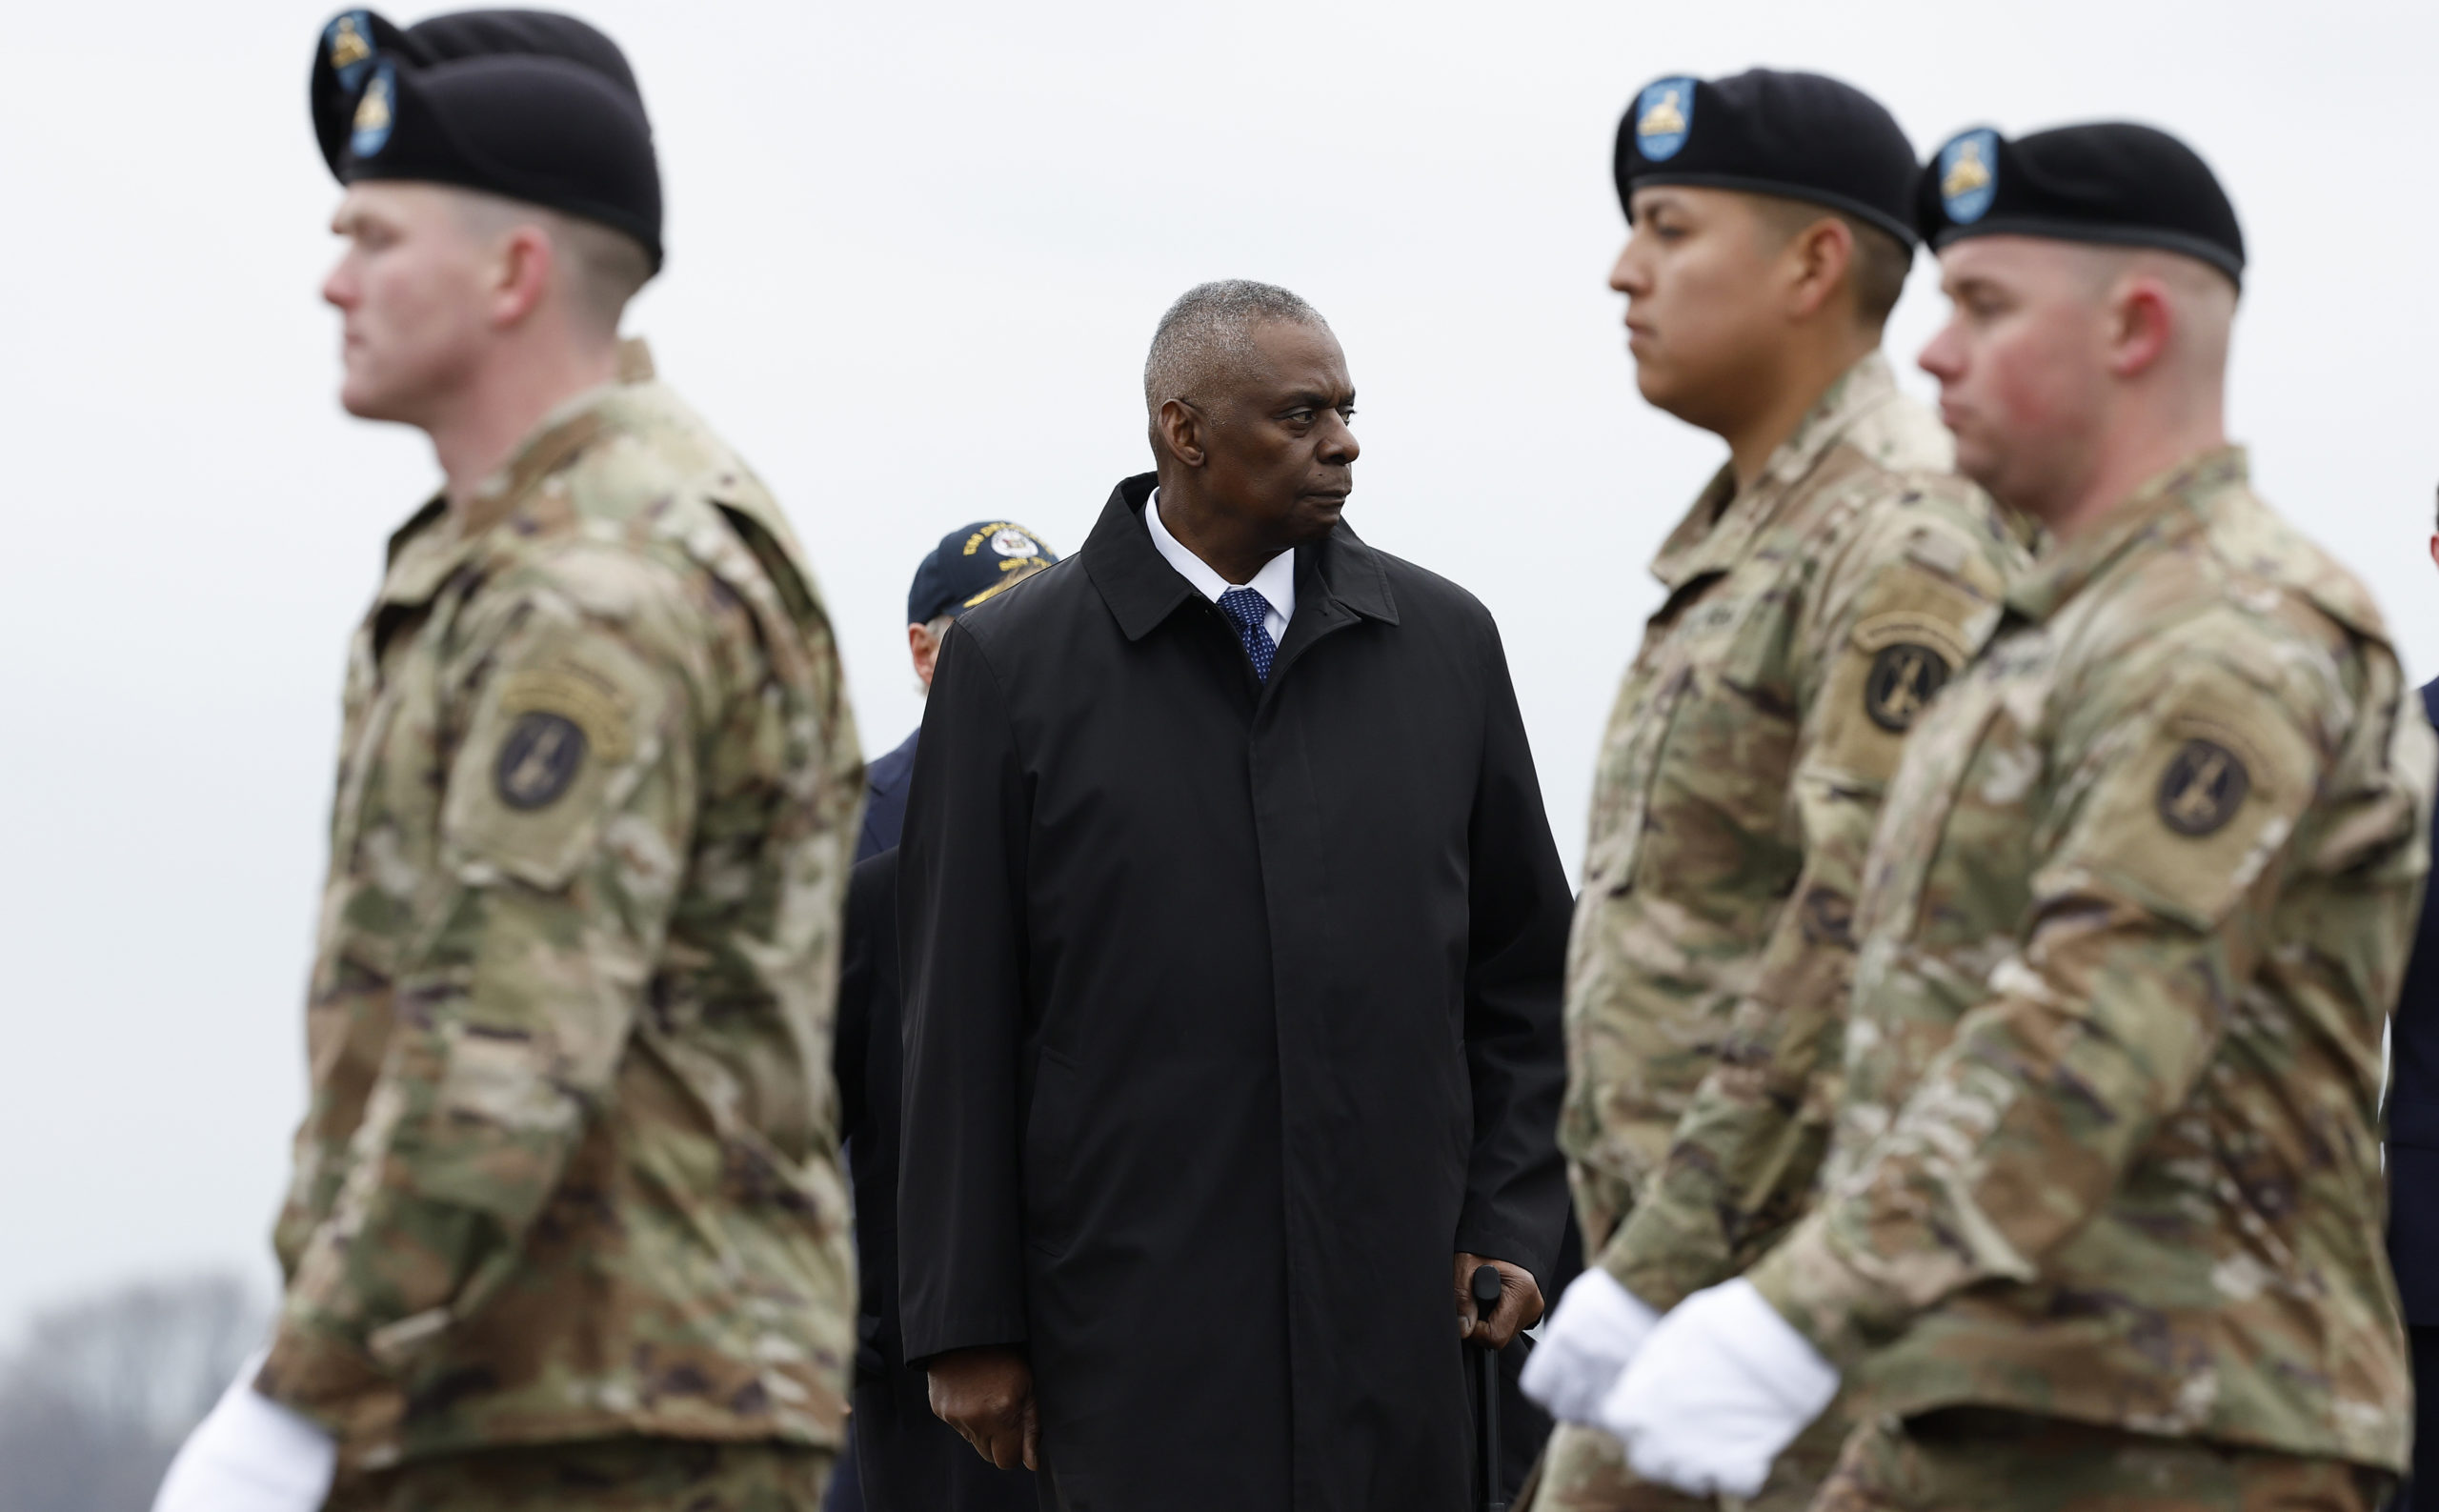 U.S. Secretary of Defense Lloyd Austin attends the dignified transfer for fallen service members U.S. Army Sgt. William Rivers, Sgt. Breonna Moffett and Sgt. Kennedy Sanders at Dover Air Force Base on February 02, 2024 in Dover, Delaware. U.S. Army Sgt. William Rivers, Sgt. Breonna Moffett and Sgt. Kennedy Sanders were killed in addition to 40 others troops were injured during a drone strike in Jordan. (Photo by Kevin Dietsch/Getty Images)